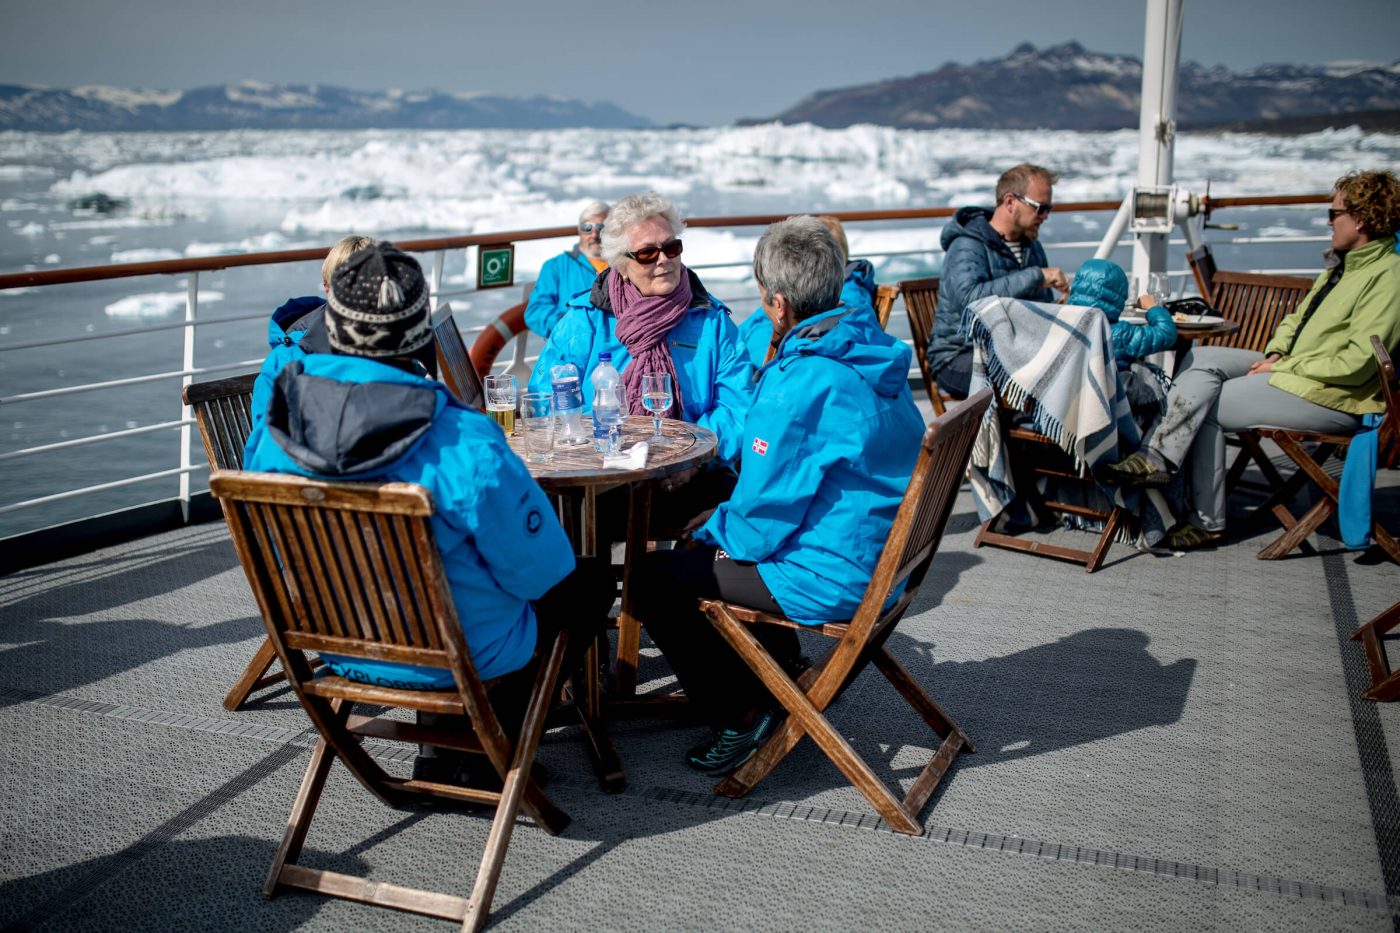 Cruise guests having lunch on the upper deck of MS Fram in the Disko Bay in Greenland. Photo by Mads Pihl